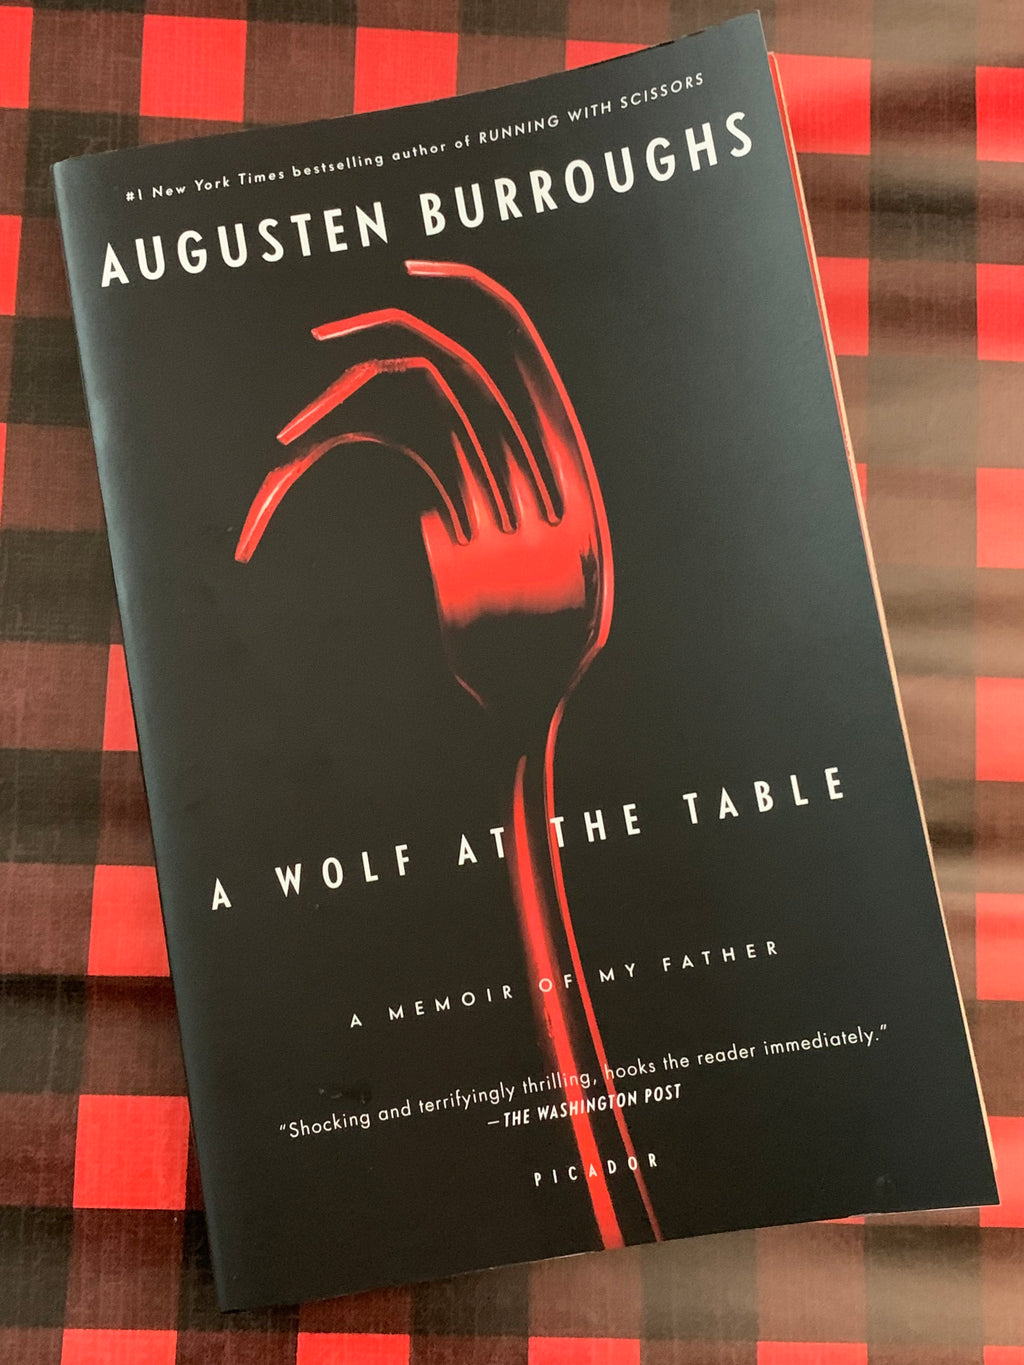 A Wolf At the Table: A Memoir of My Father- By Augusten Burroughs